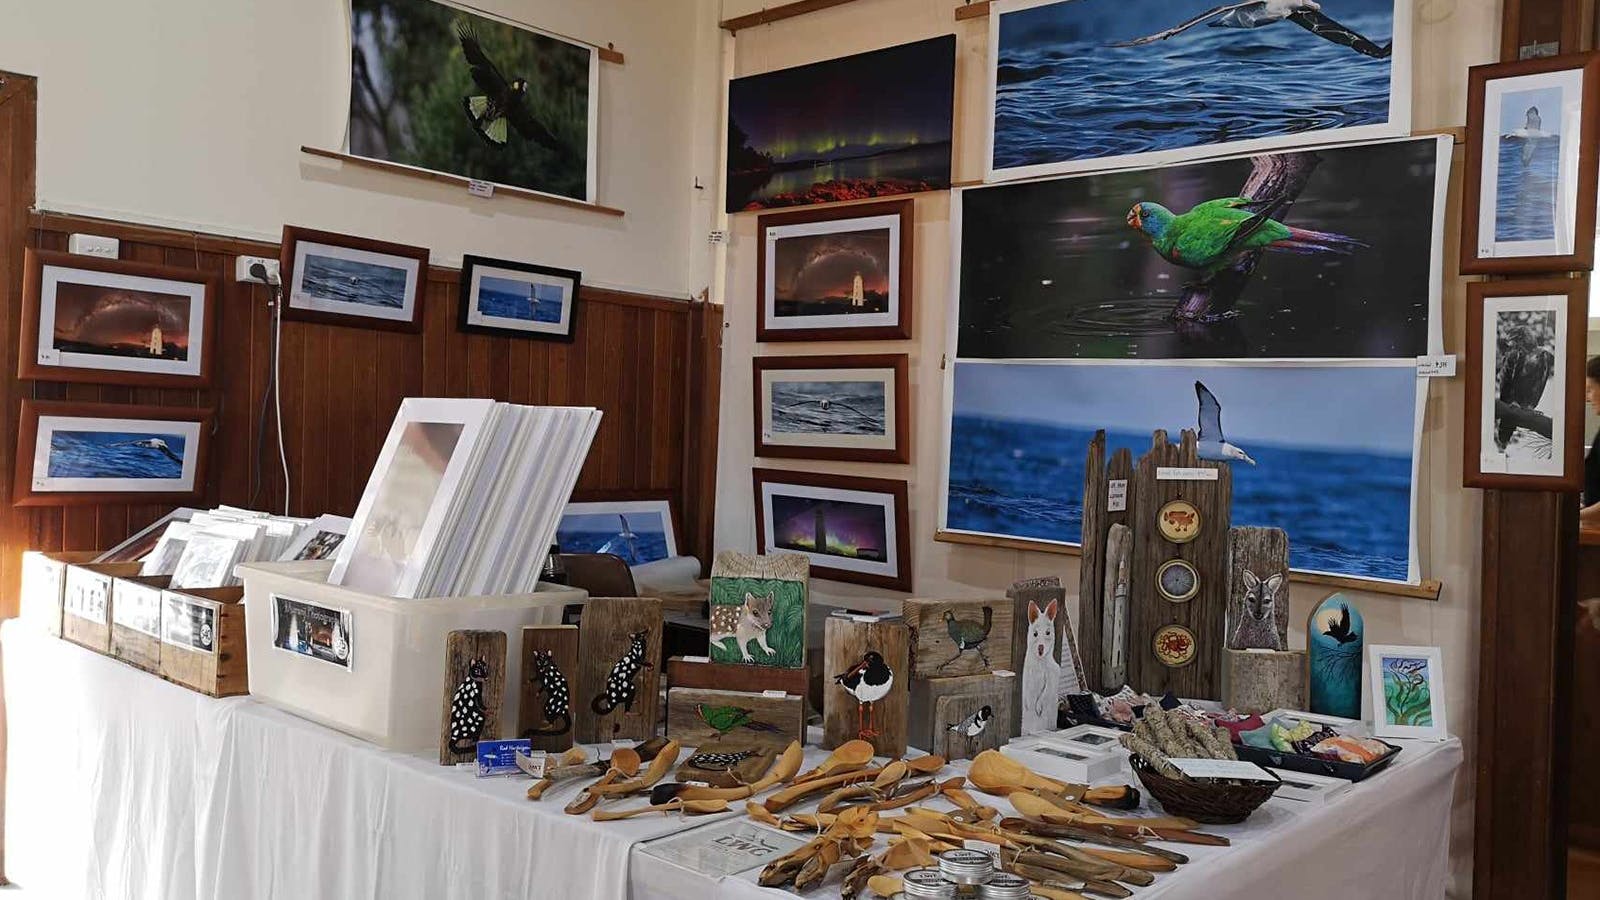 A display of Rod Hartvigsen's Photography, Landfall Woodcraft and original artworks by Kerry Marvel